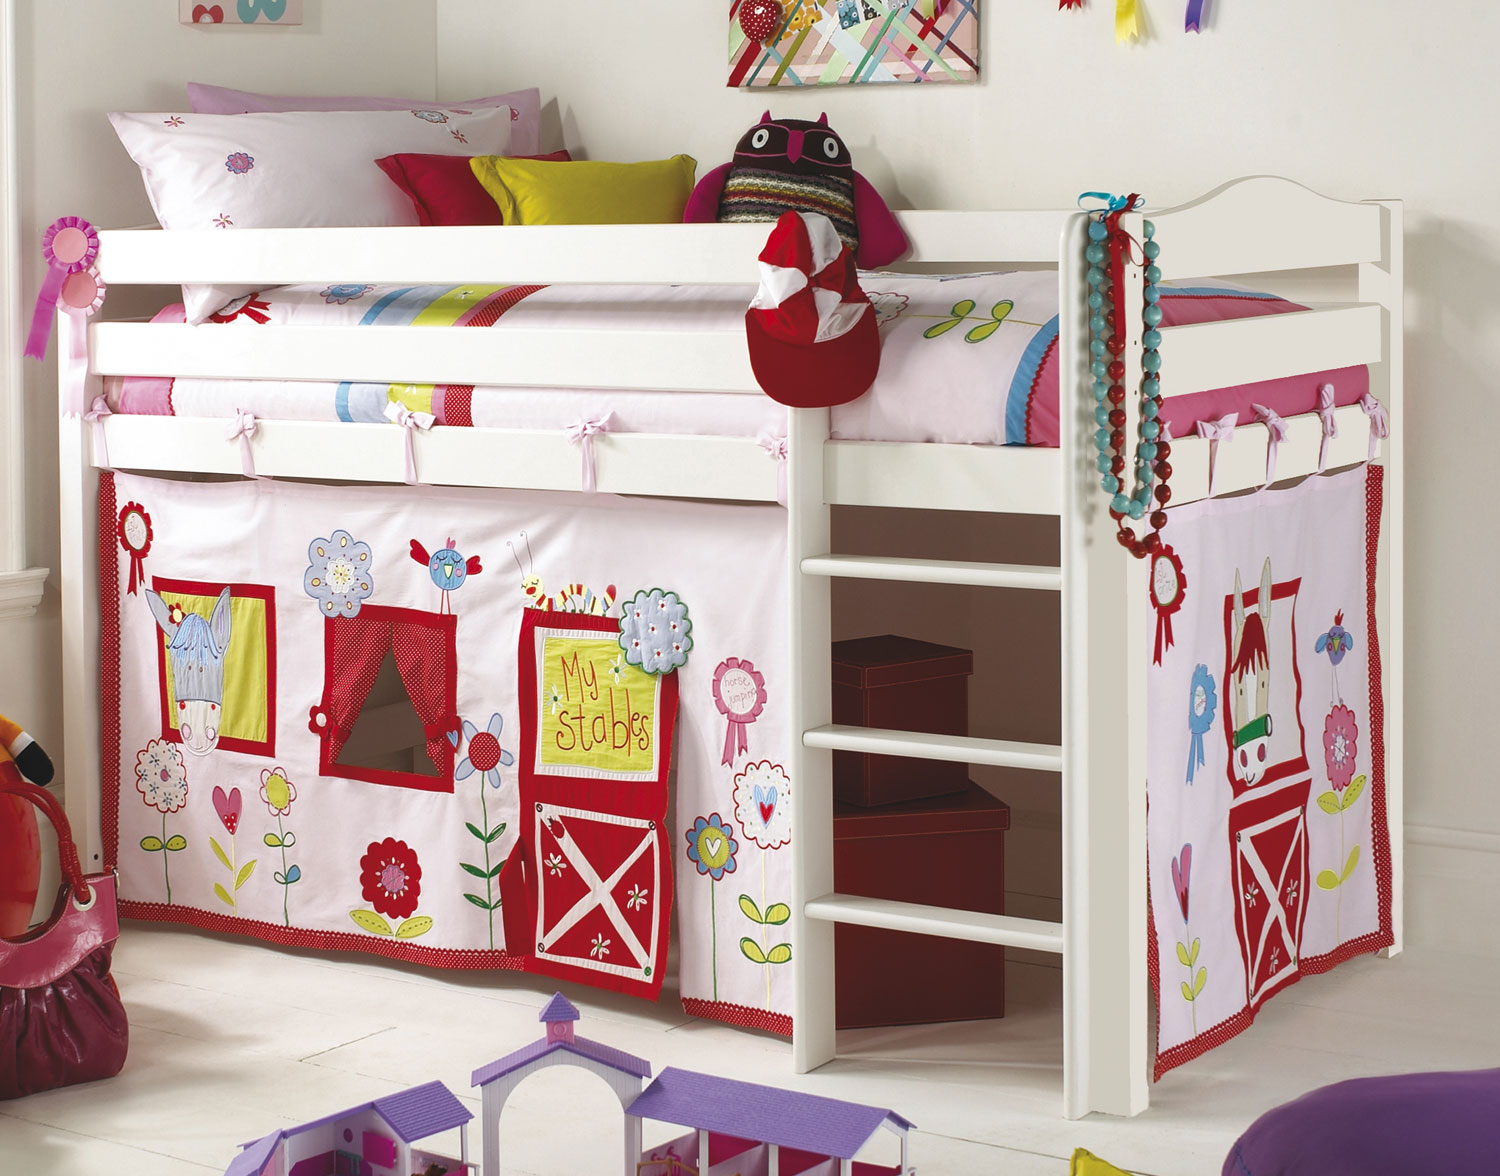 Attractive Interior Design For Kids Rooms Decor : Comely White Comforter In Bunk Bed With Ladder Also White Tent Style Cover With Red Wooden Cube And Purple Fabric Cushion For Kids Bedroom Interior Design Decoration Ideas